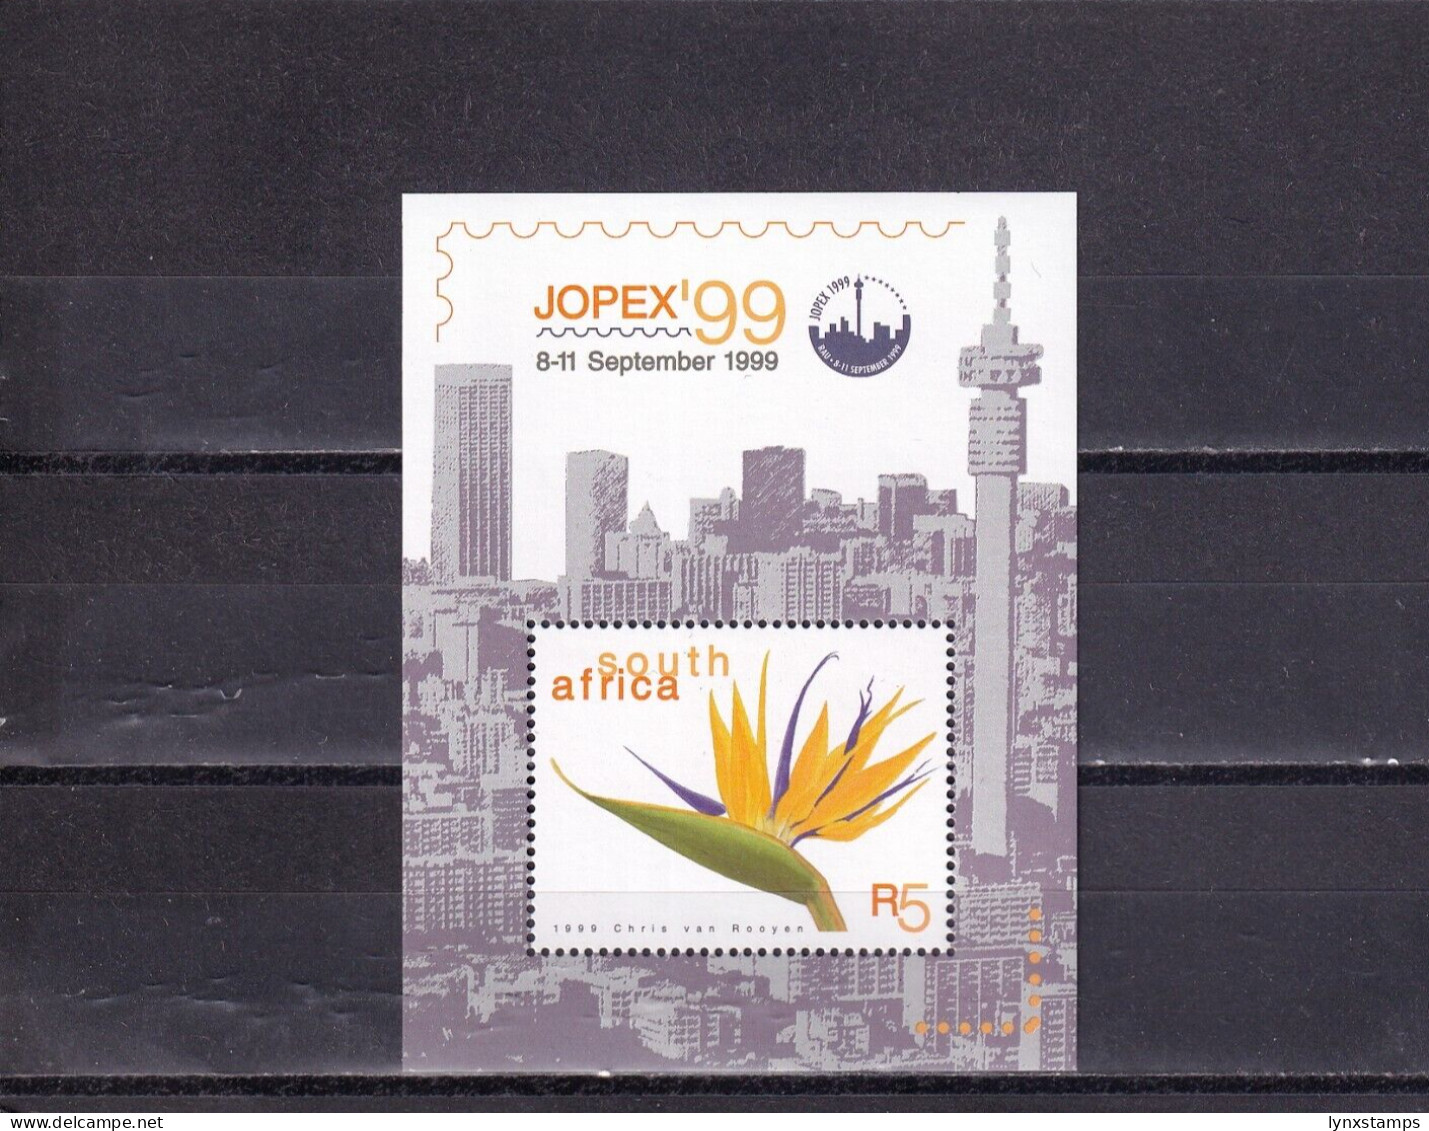 SA05 South Africa 1999 JOPEX '99 National Stamp Exhib. Johannesbur Minisheet - Unused Stamps